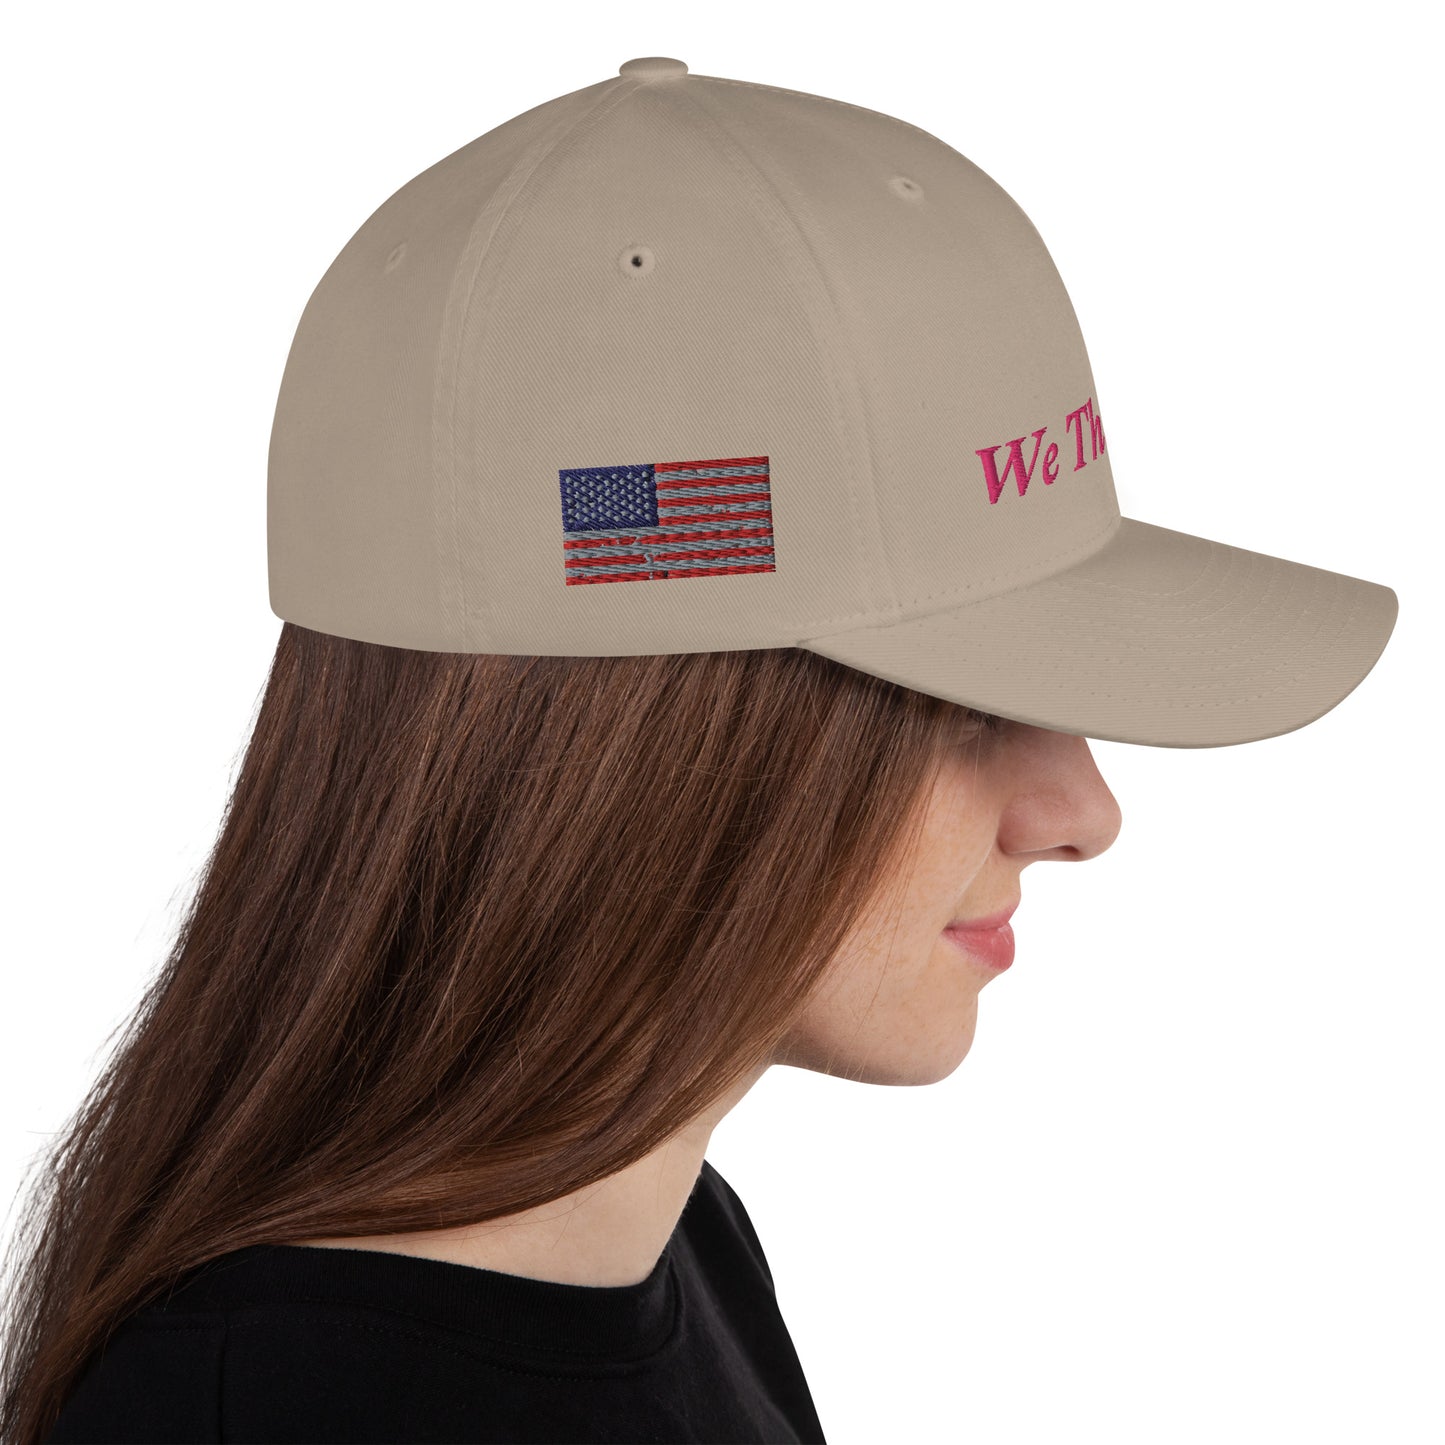 We The People Structured Twill Cap